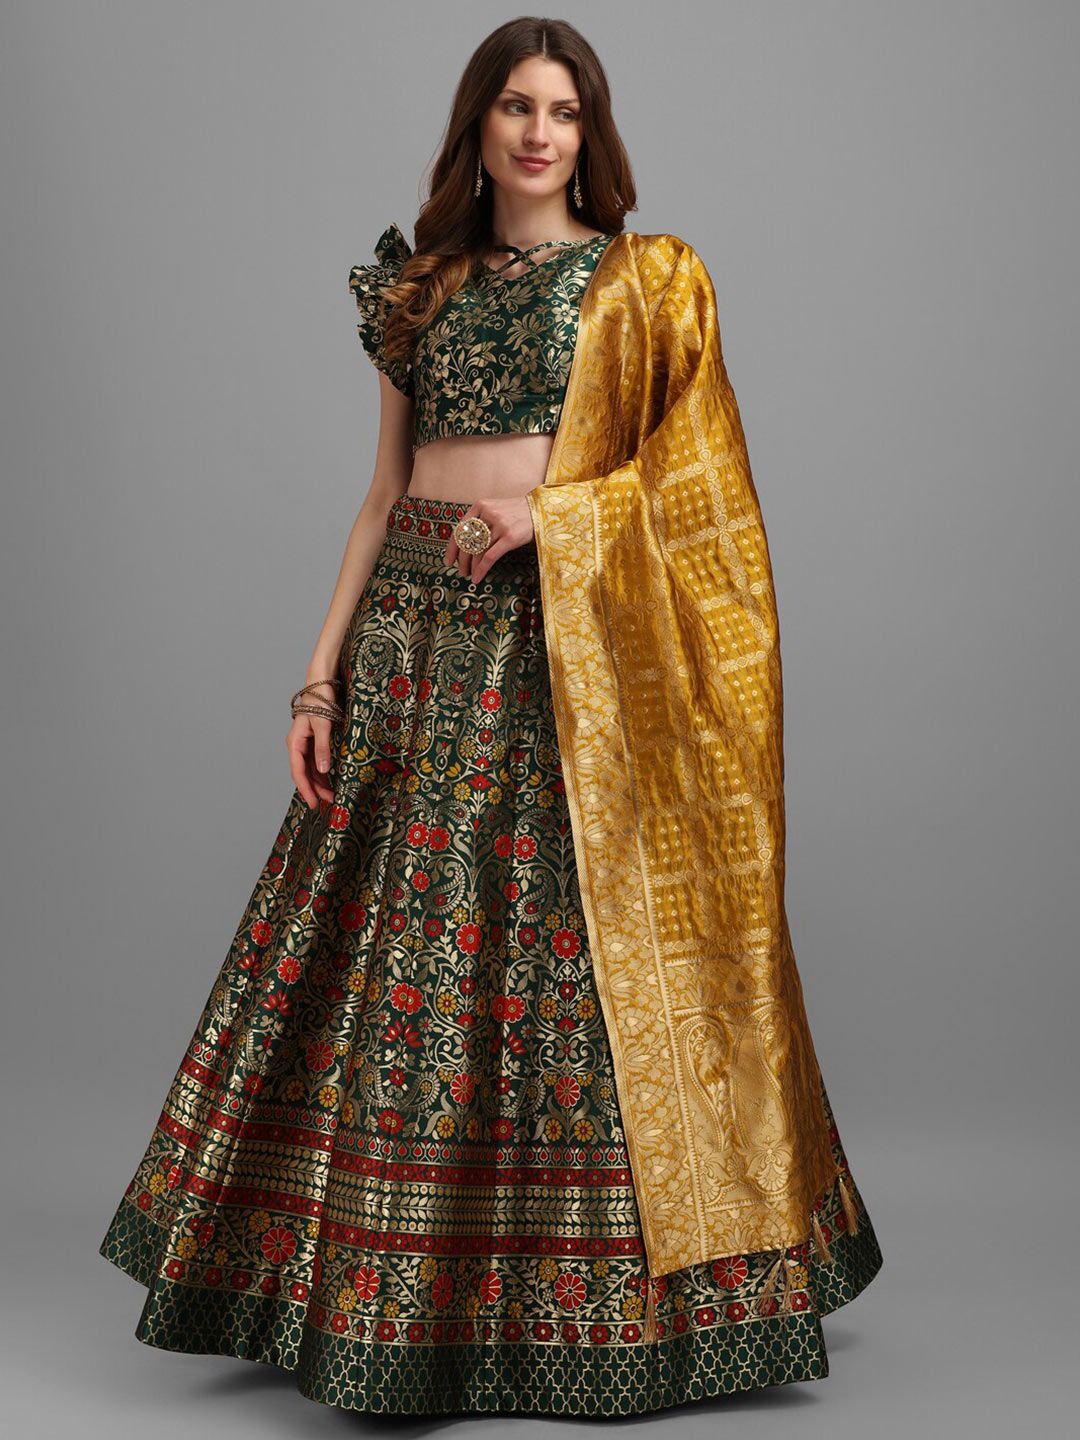 PURVAJA Green & Mustard Semi-Stitched Lehenga & Unstitched Blouse With Dupatta Price in India